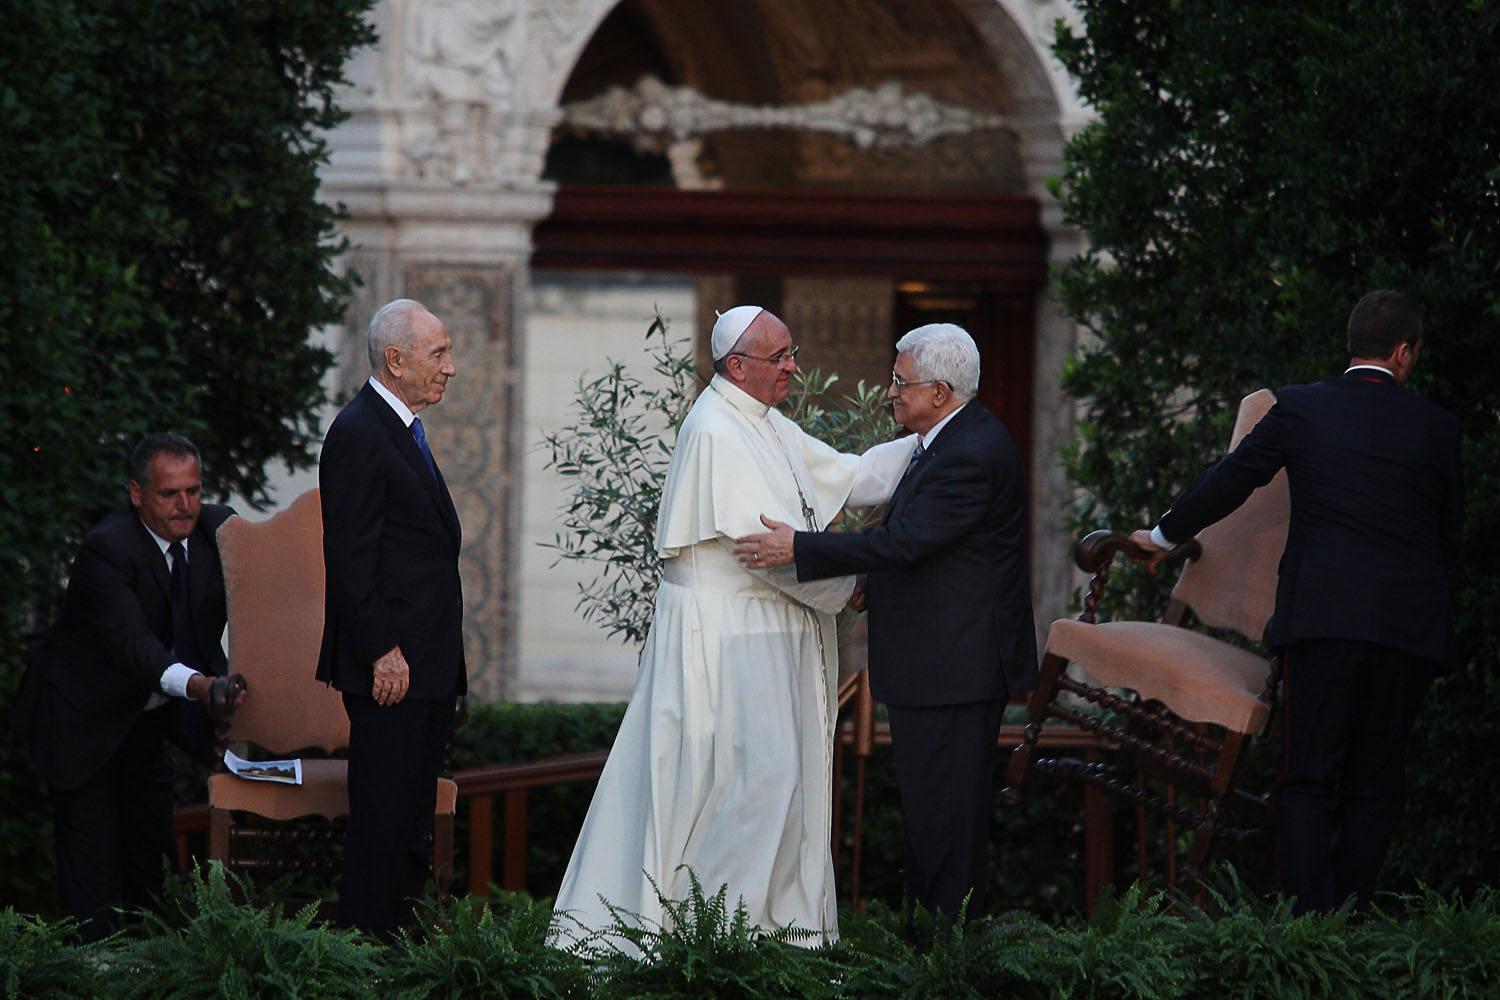 Prayer for peace at Vatican Gardens